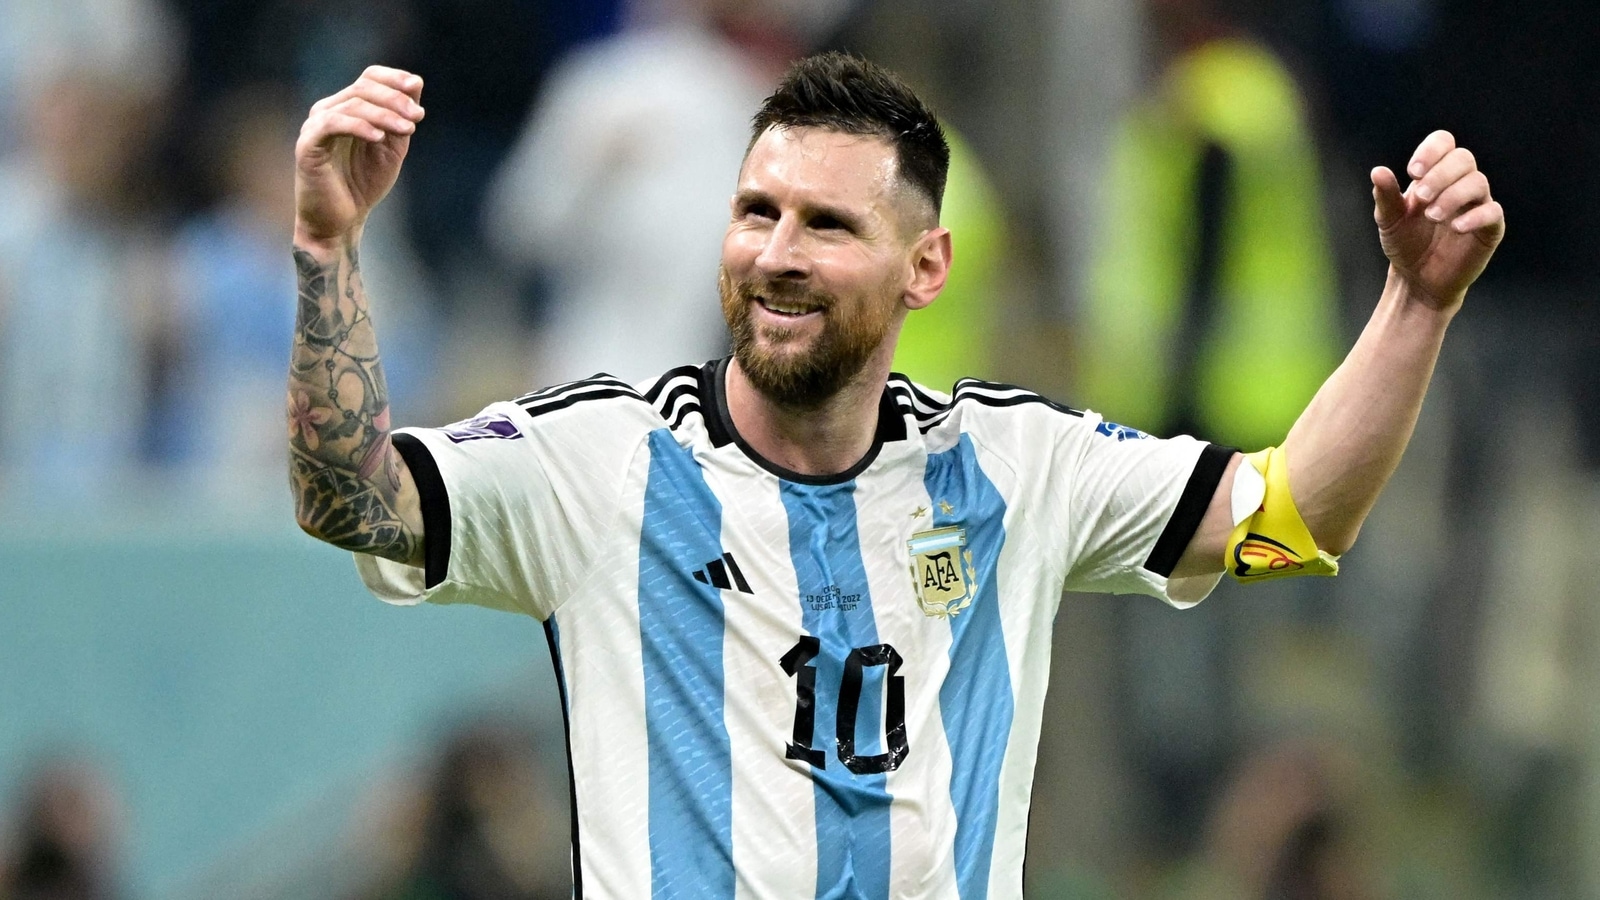 Lionel Messi Should Take a Break From Internationals: Mario Kempes